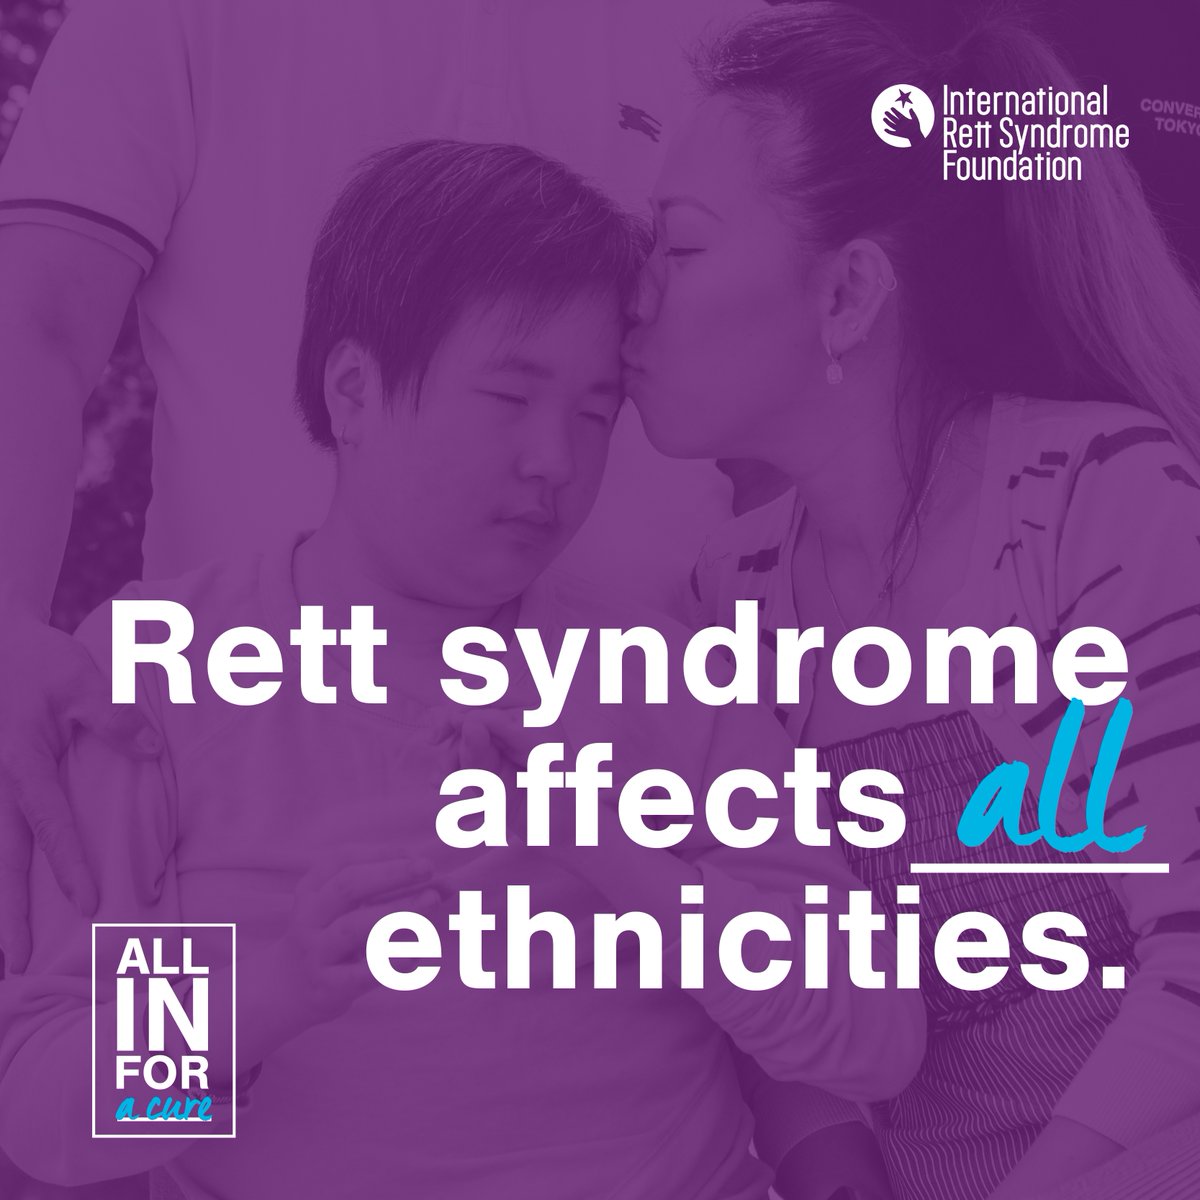 October is #RettSyndromeAwarenessMonth 
DYK💜Rett syndrome #RTT is often misdiagnosed as #autism, #CerebralPalsy or non-specific developmental delay. Researchers are empowering RTTfamilies to be involved as partners in research

More info @Rettsyndrome 🔗rettsyndrome.org/about-rett-syn…💜